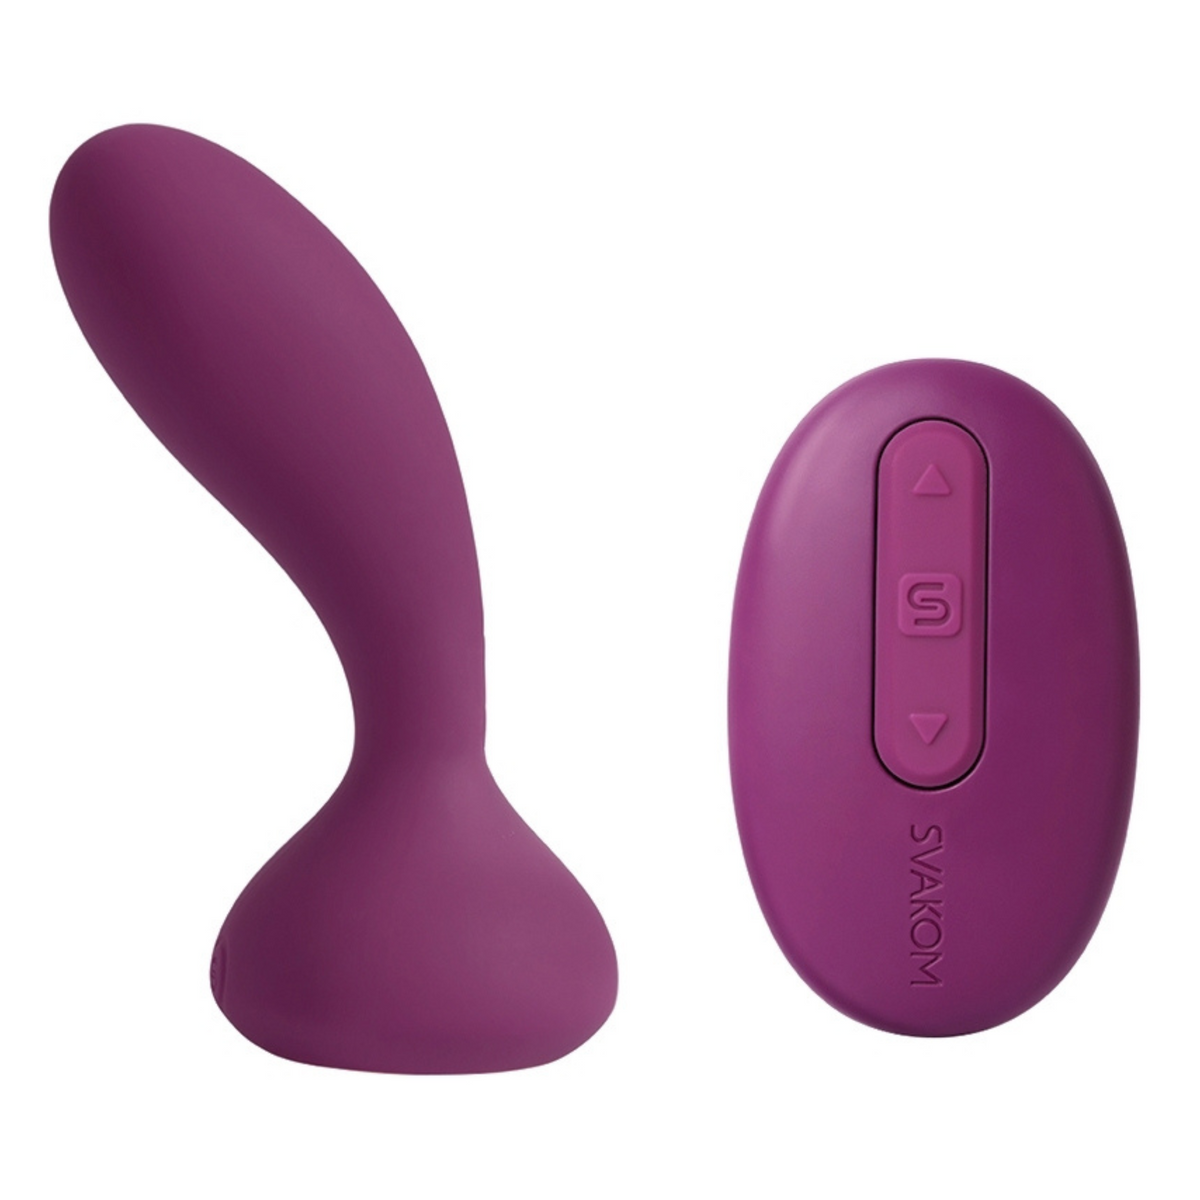 App & Remote Controlled Anal Toys